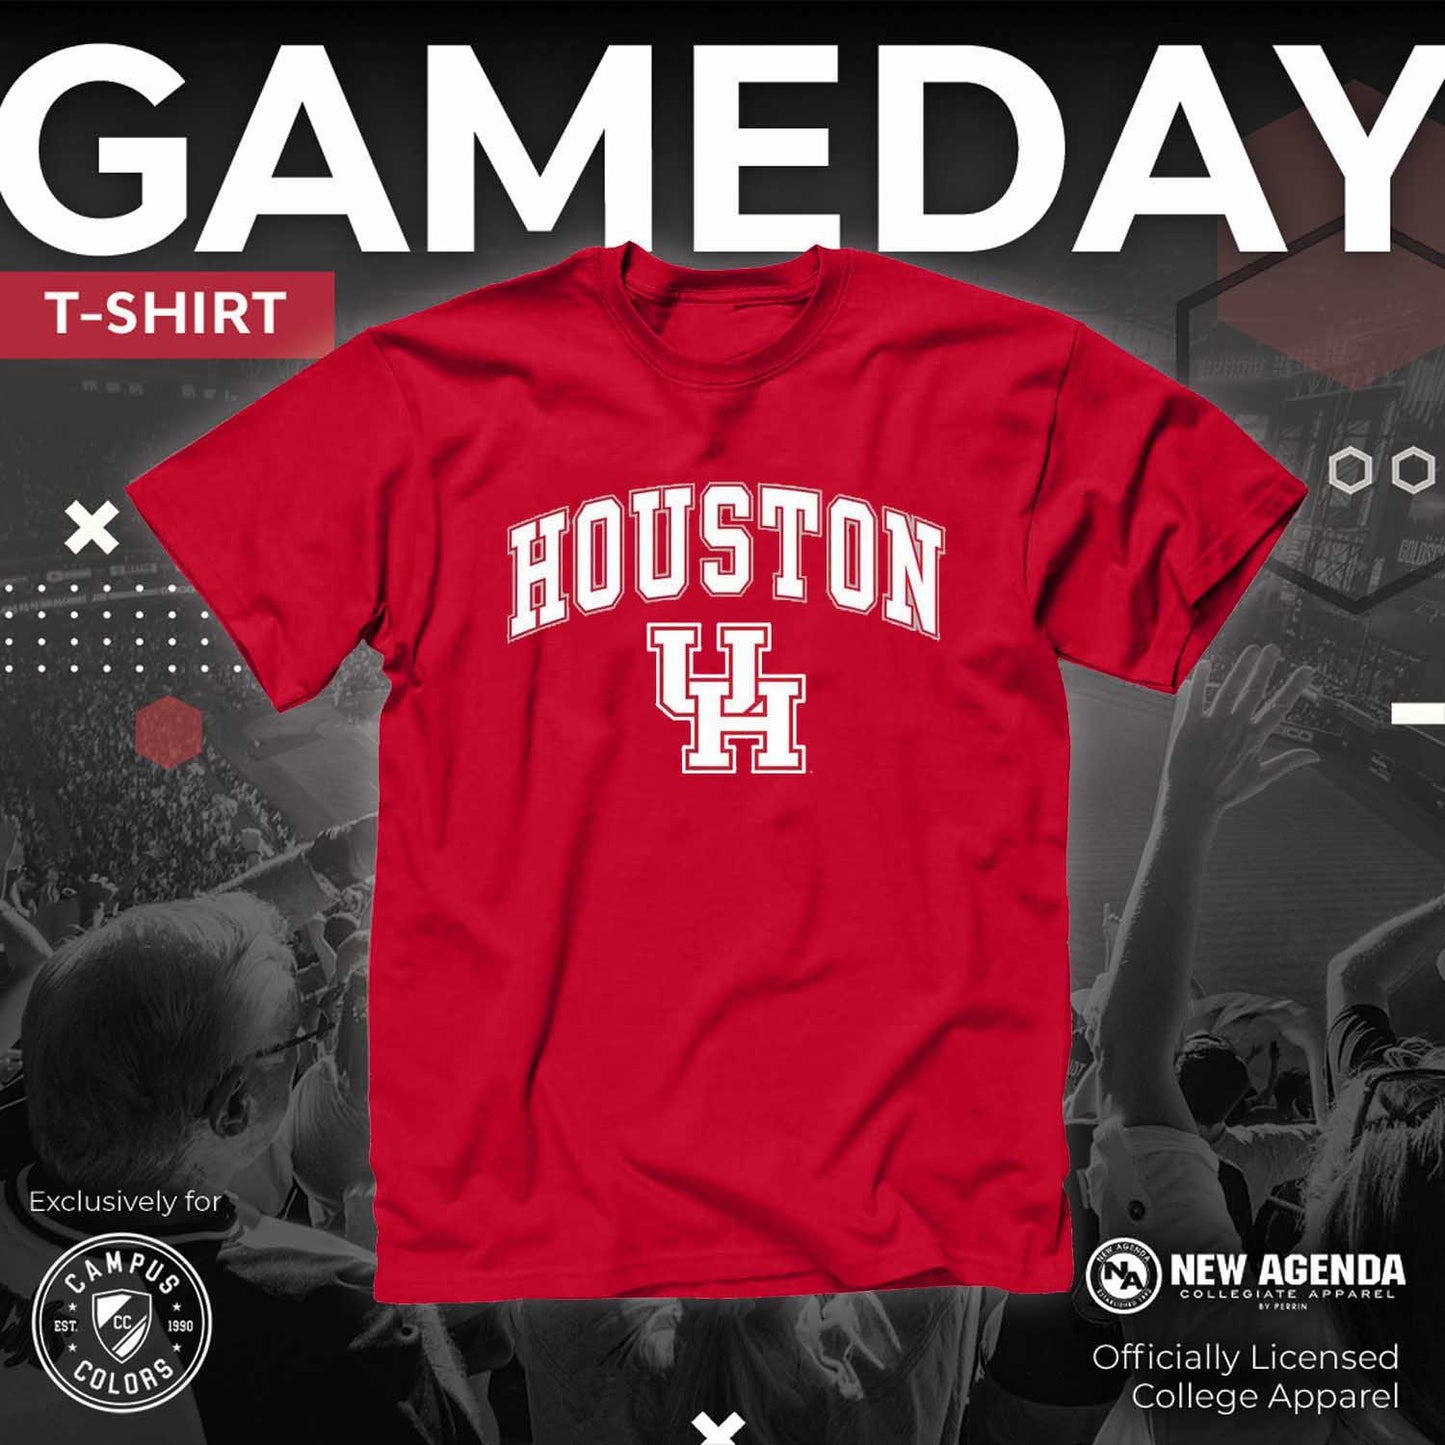 Houston Cougars NCAA Adult Gameday Cotton T-Shirt - Red